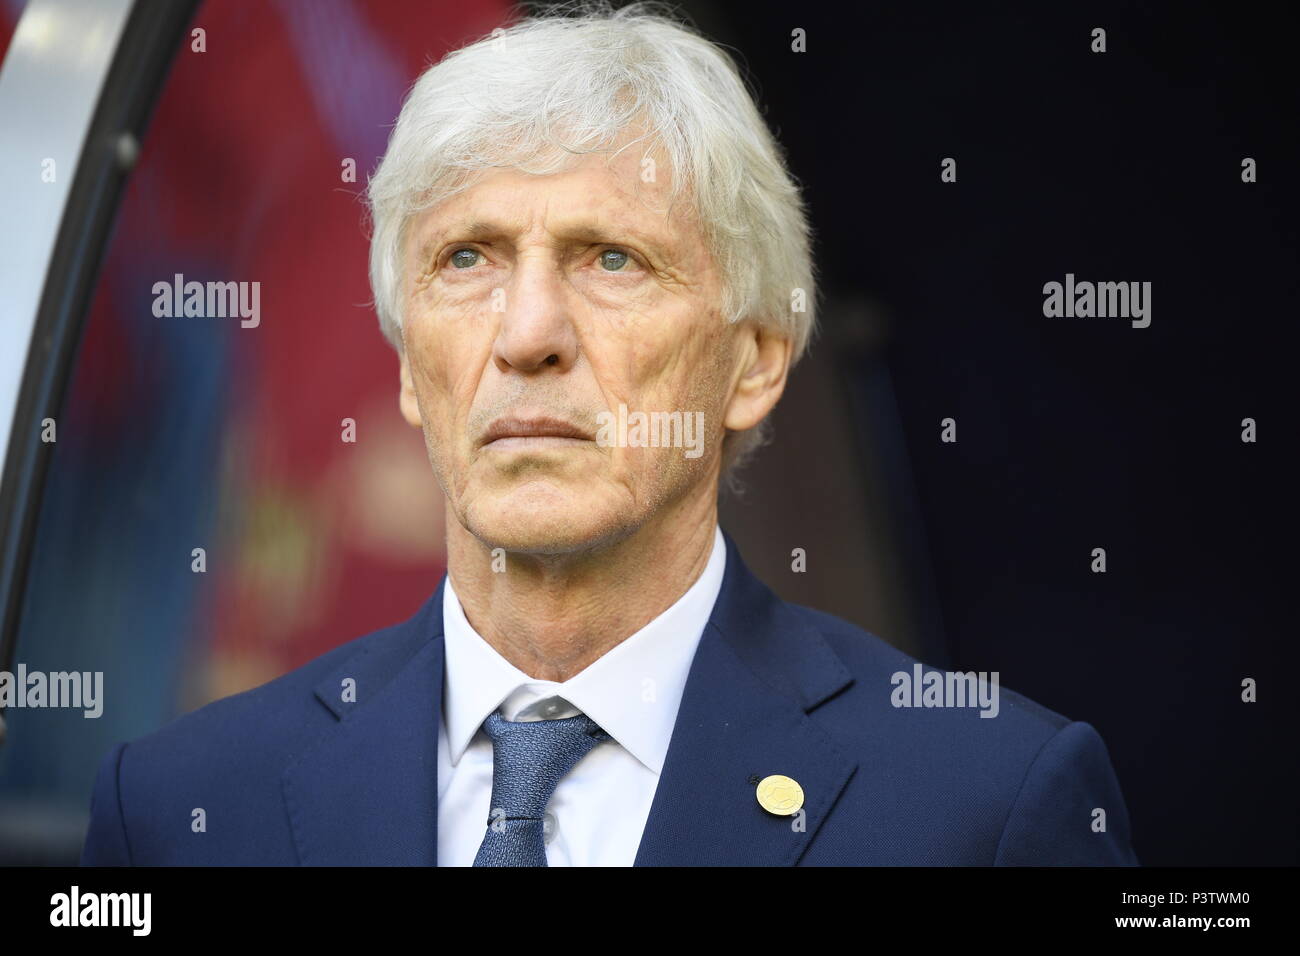 Saransk, Russia. 19th June, 2018. Head coach Jose Pekerman of Colombia is seen prior to a Group H match between Colombia and Japan at the 2018 FIFA World Cup in Saransk, Russia, June 19, 2018. Credit: Lui Siu Wai/Xinhua/Alamy Live News Stock Photo